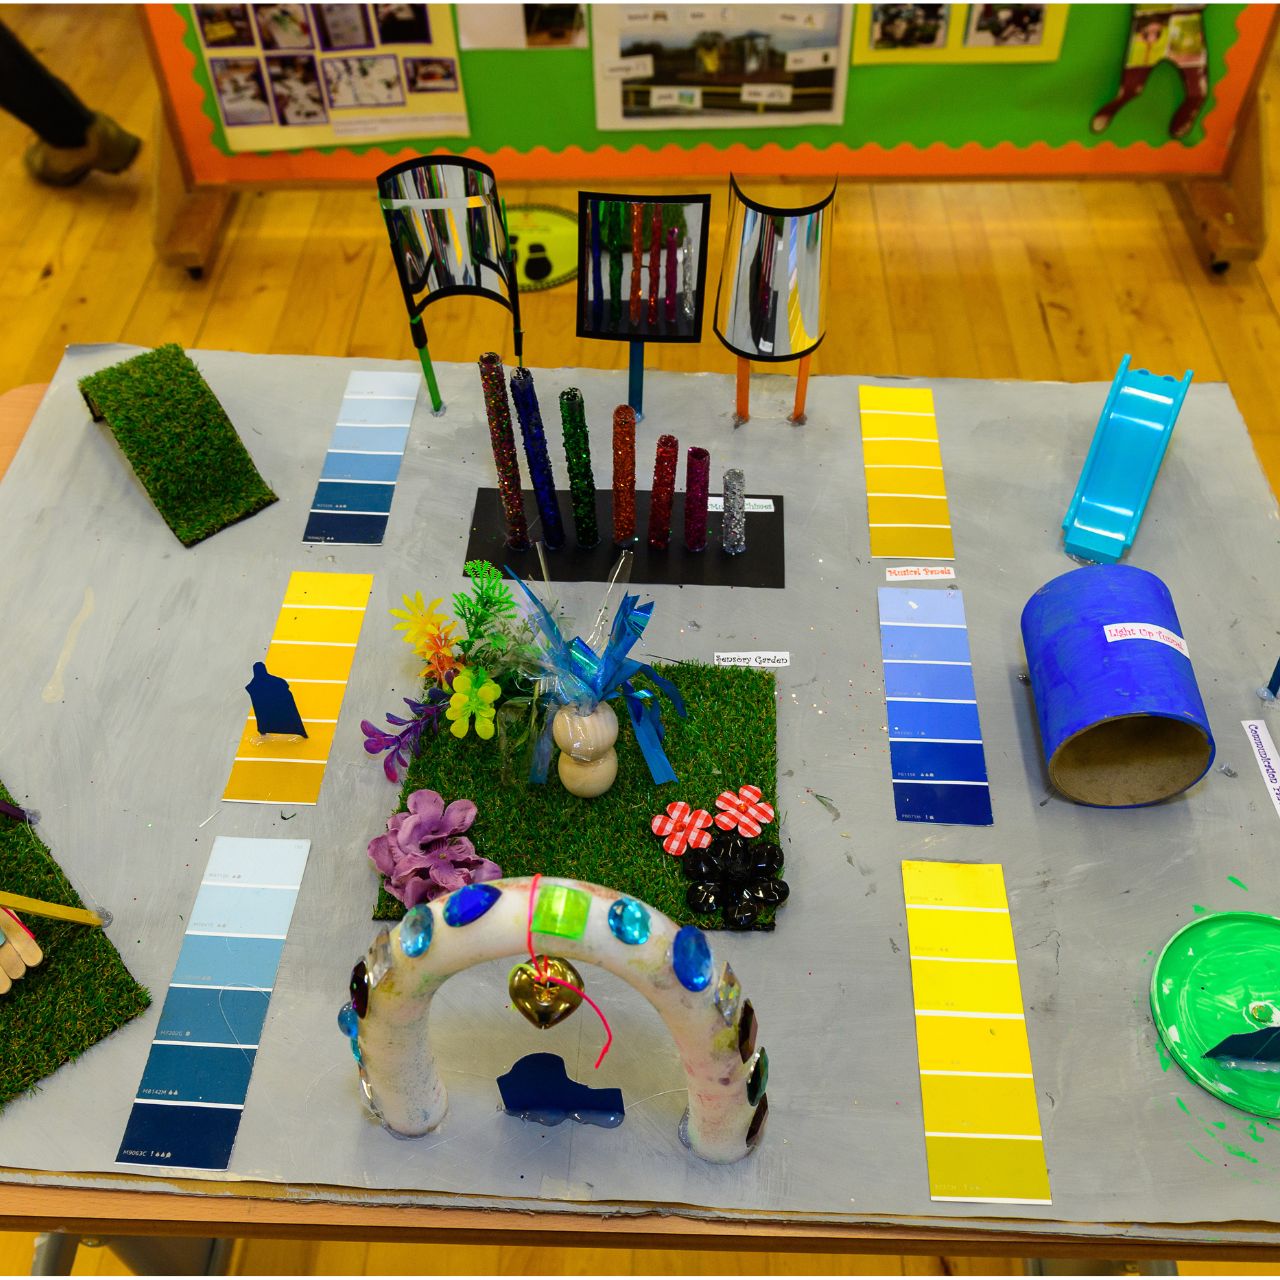 This photograph shows a 3-dimensional model of an inclusive play park that was made by one of the students to show what they would like in an inclusive play park.